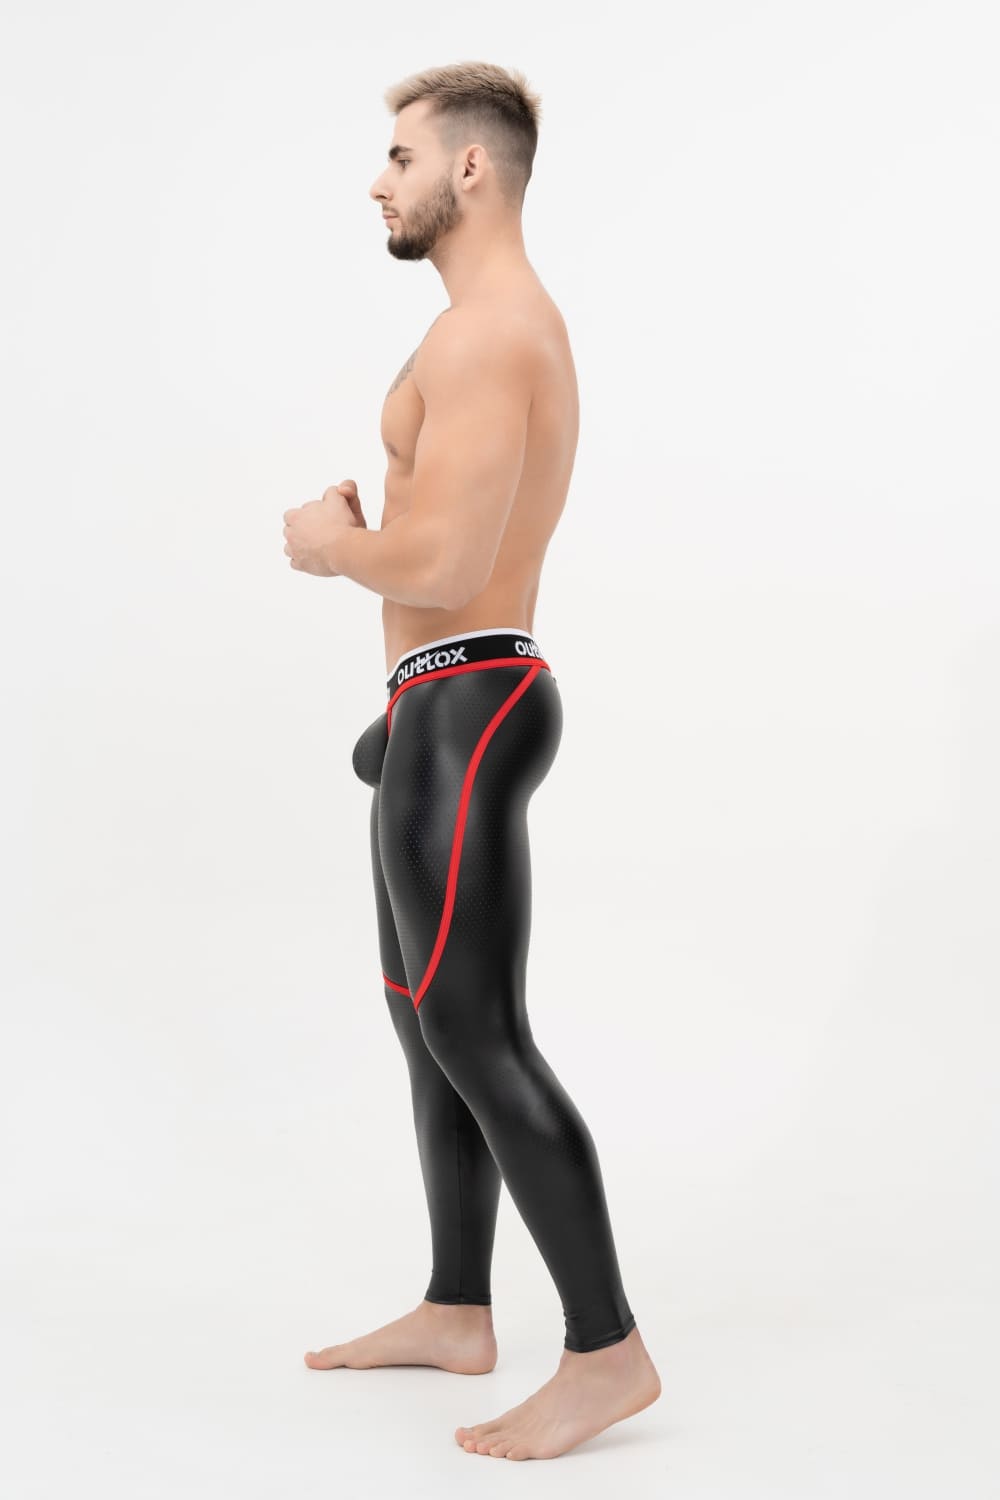 Outtox. Zip-Rear Leggings with Snap Codpiece. Black+Red